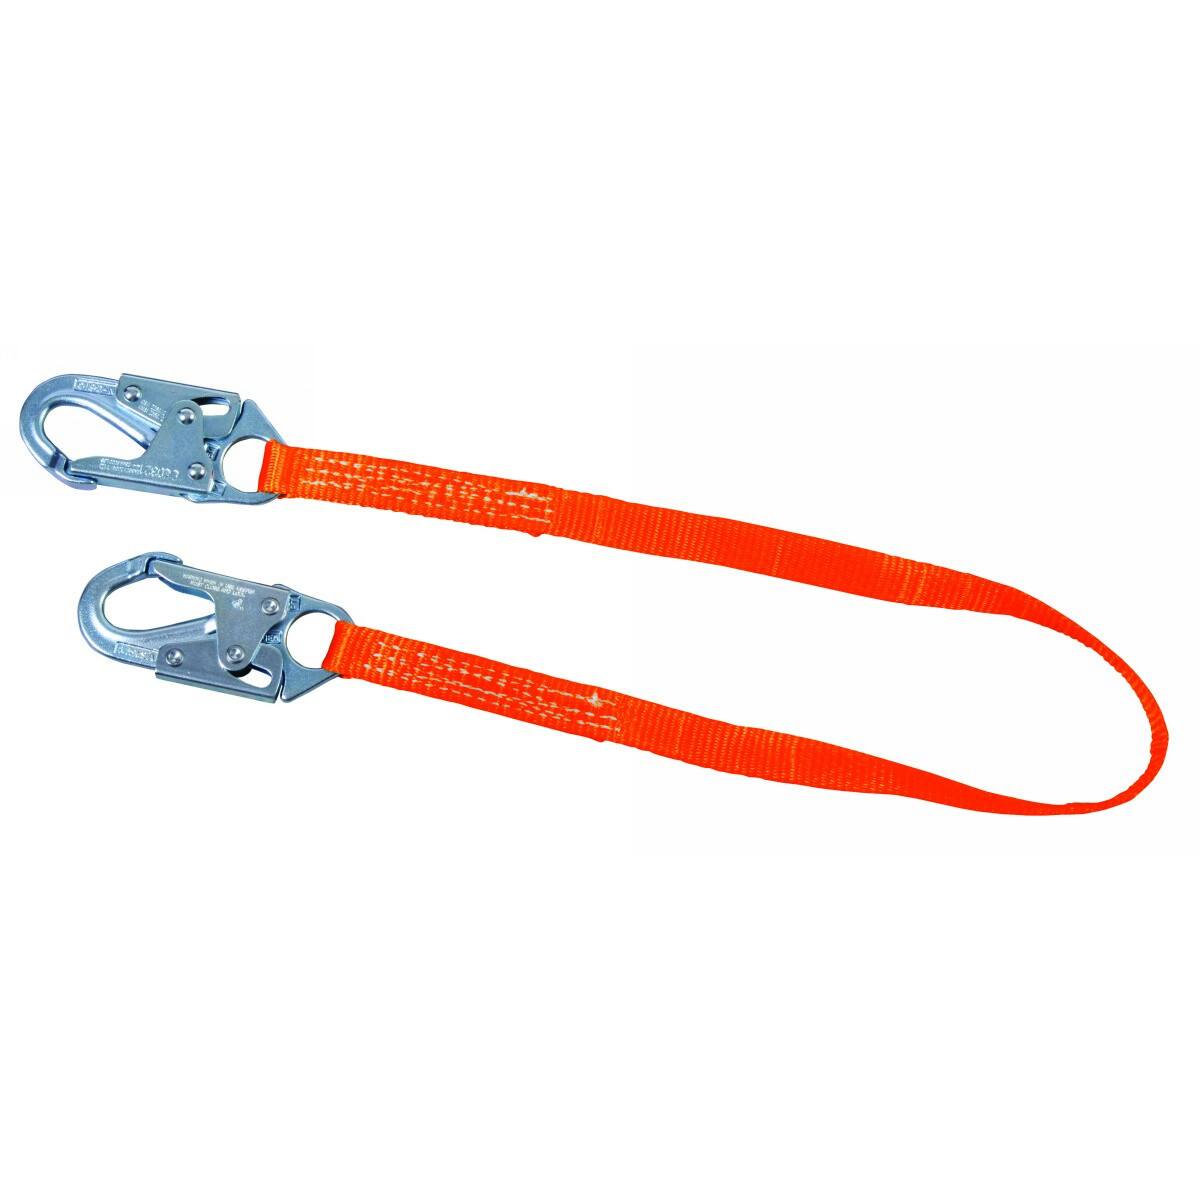 Honeywell Miller® Titan™ 6' Polyester Web Positioning Lanyard With Locking Snap Hook Harness Connector